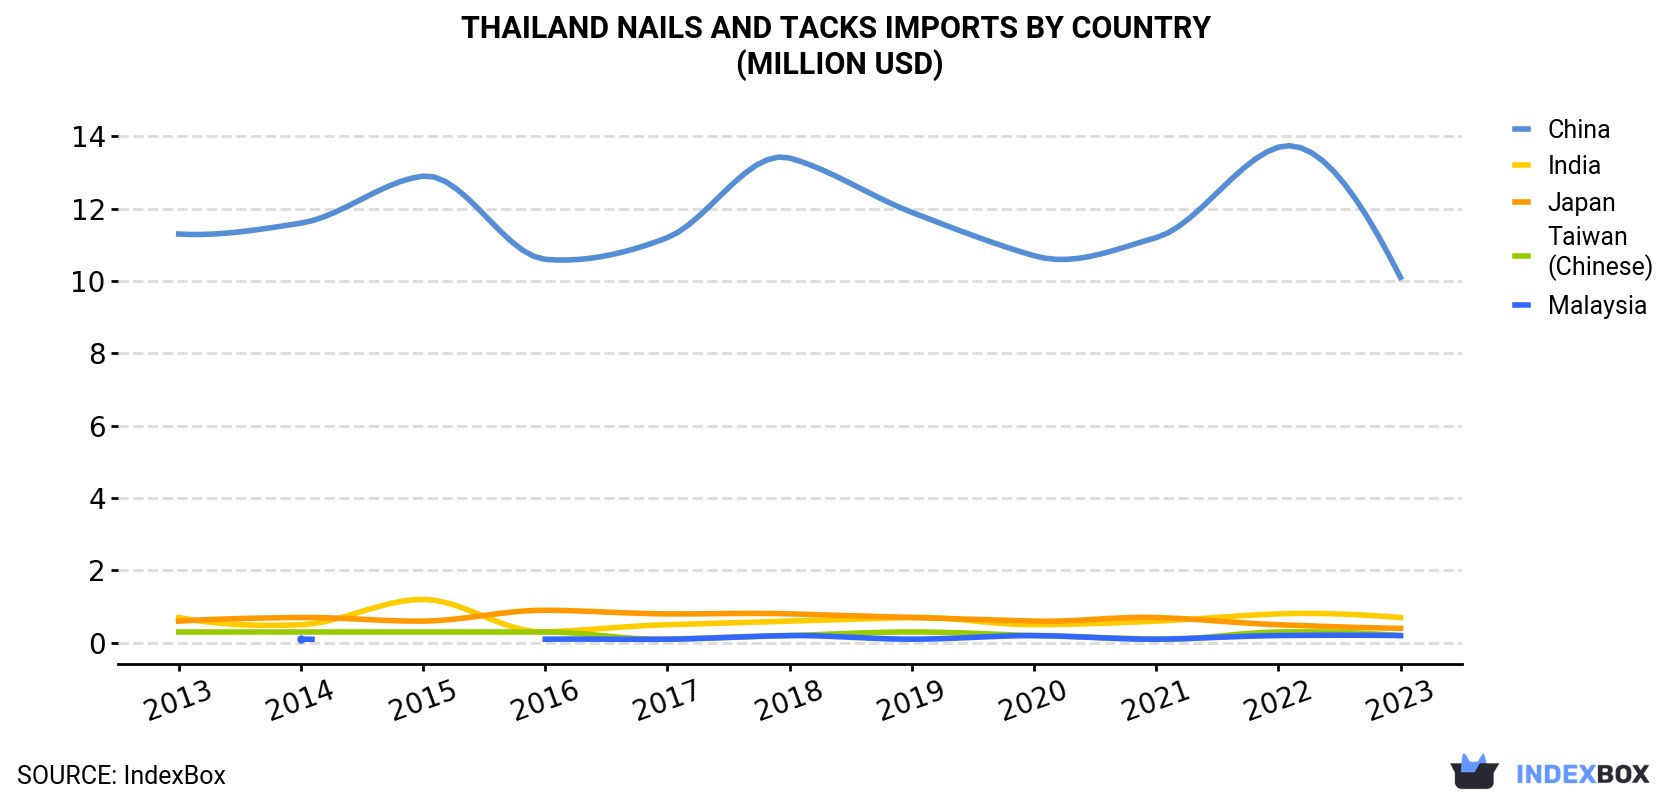 Thailand Nails And Tacks Imports By Country (Million USD)